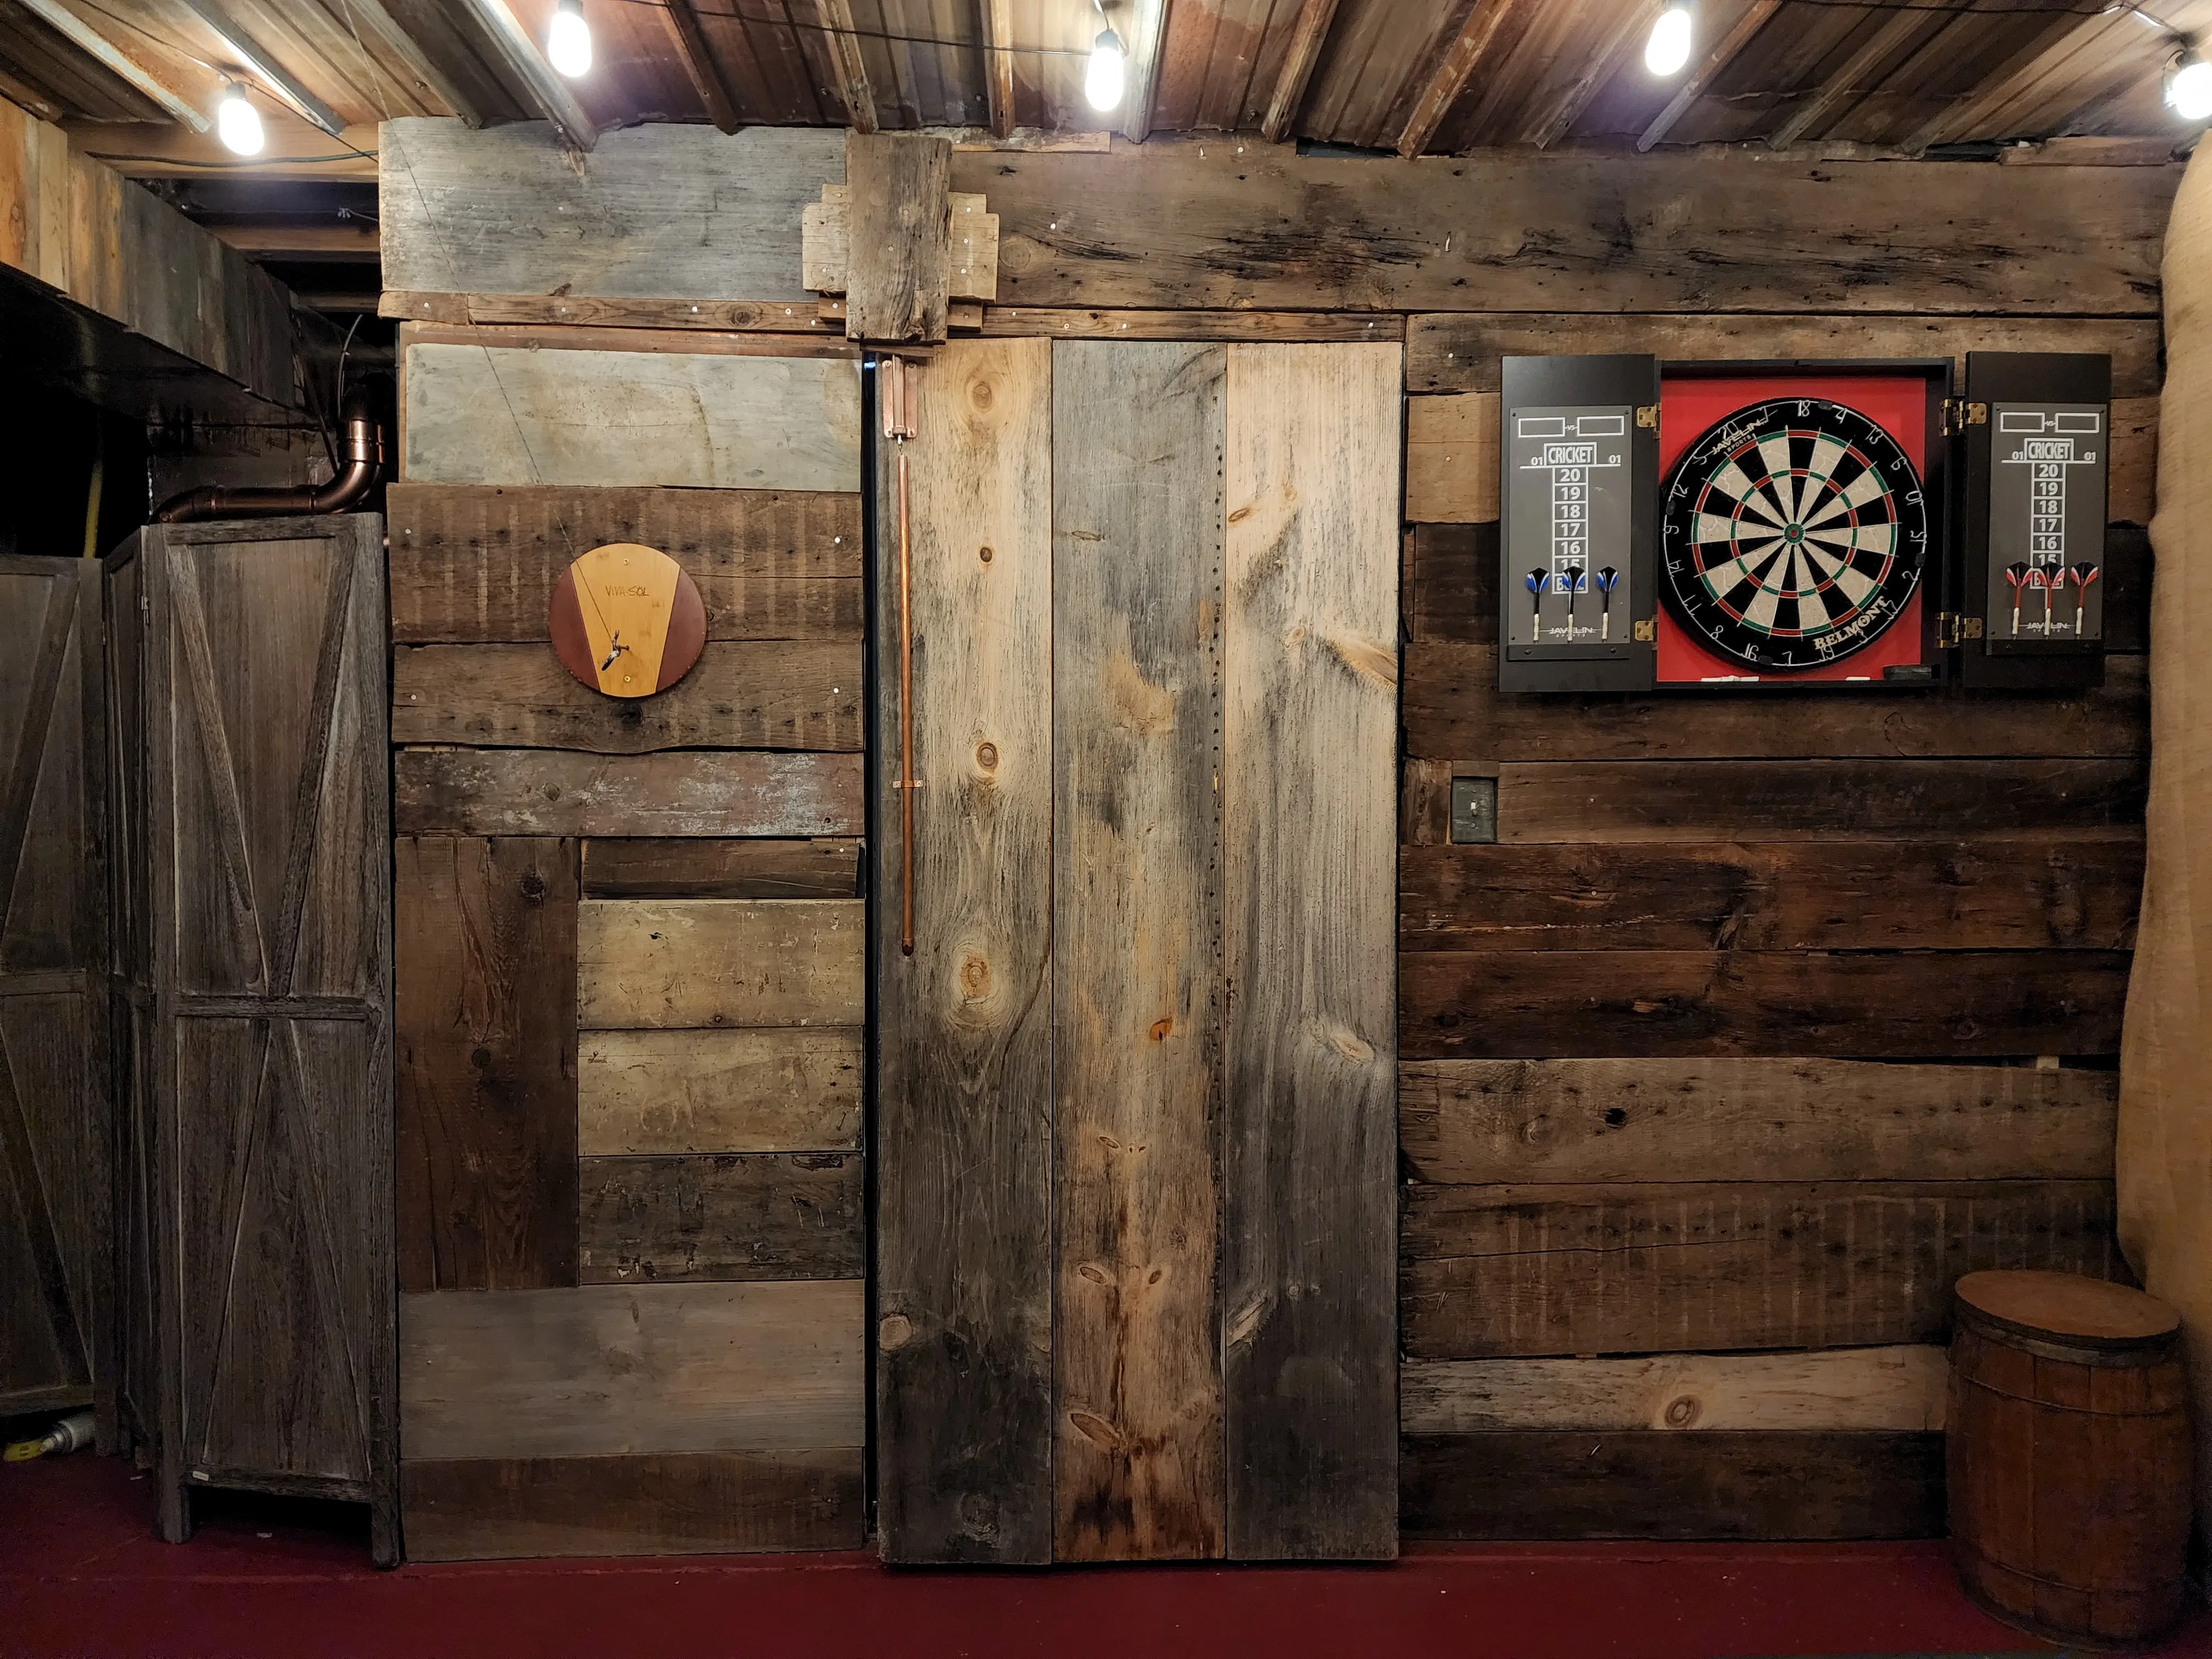 Rustic wall with 100 year old beams. Secret door bookcase back with weathered wood. Dartboard and patio lights on corrugated metal